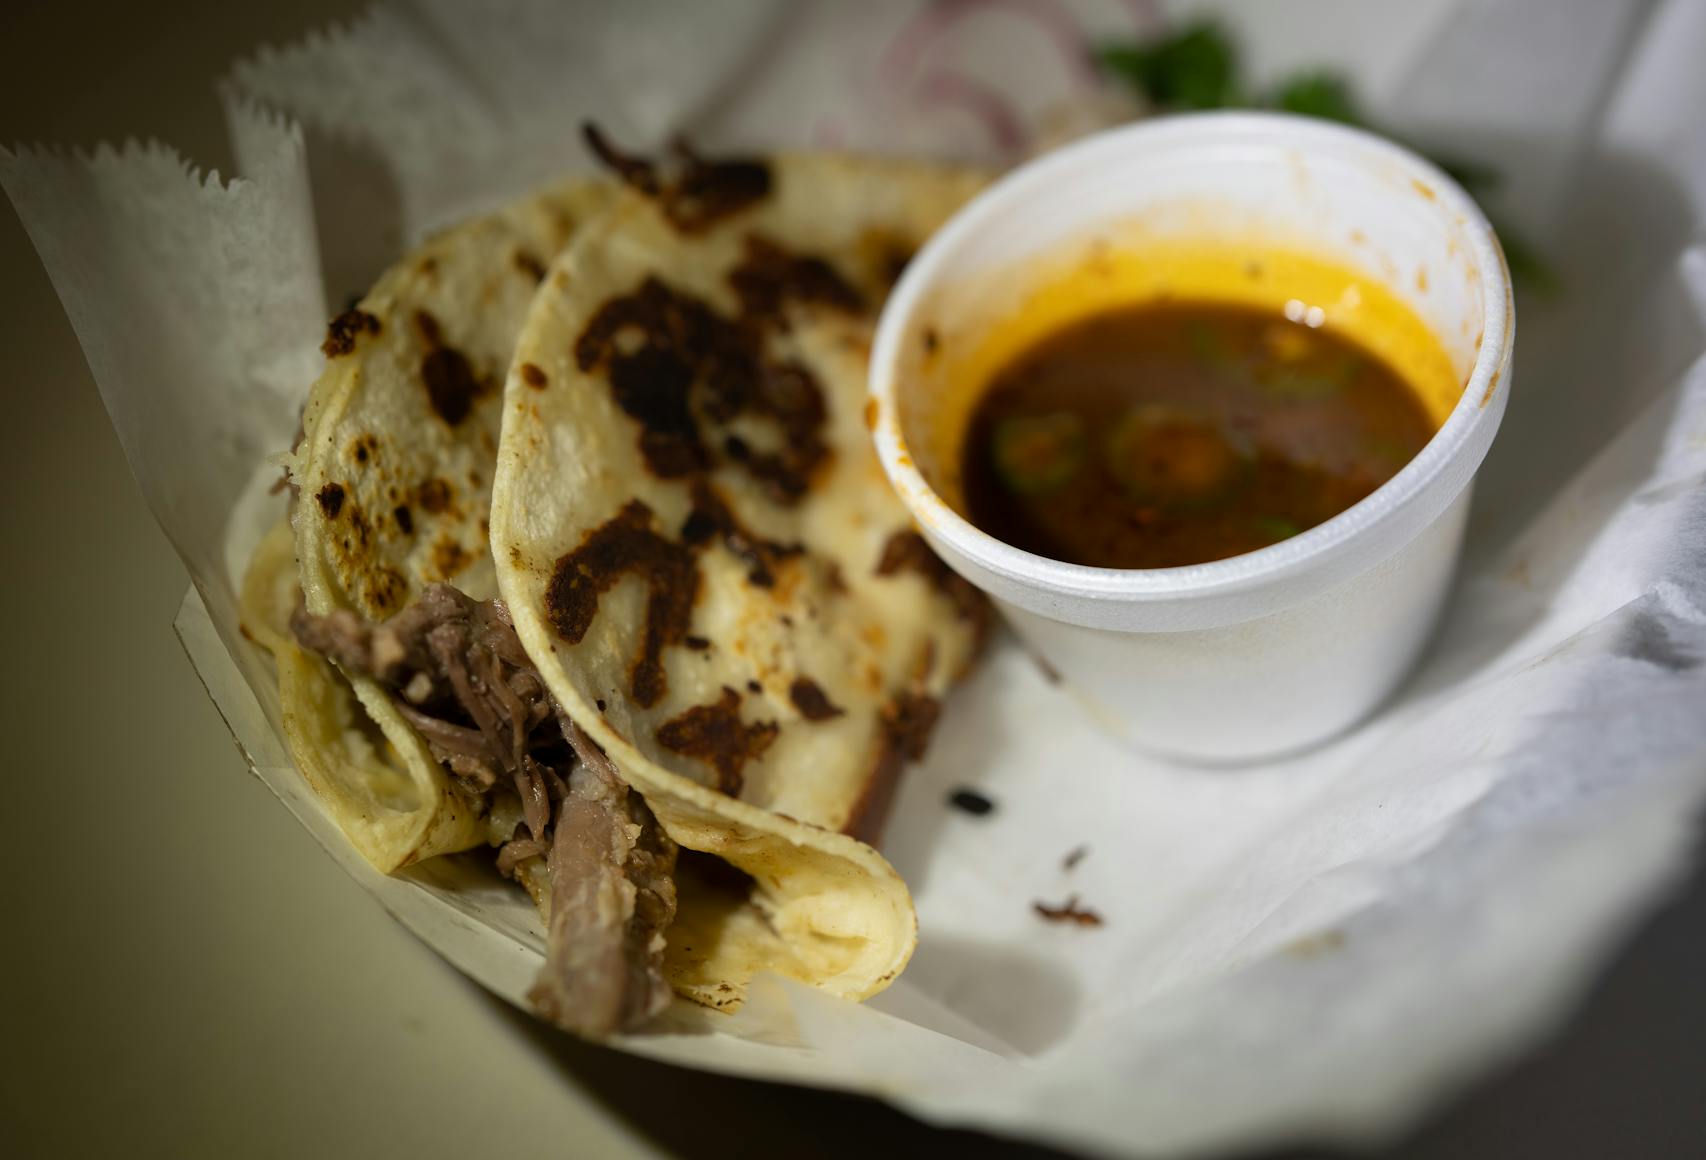 Tacos Birria from Tejas Express. New foods at the Minnesota State Fair photographed on Thursday, Aug. 25, 2022 in Falcon Heights, Minn. ] RENEE JONES SCHNEIDER • renee.jones@startribune.com